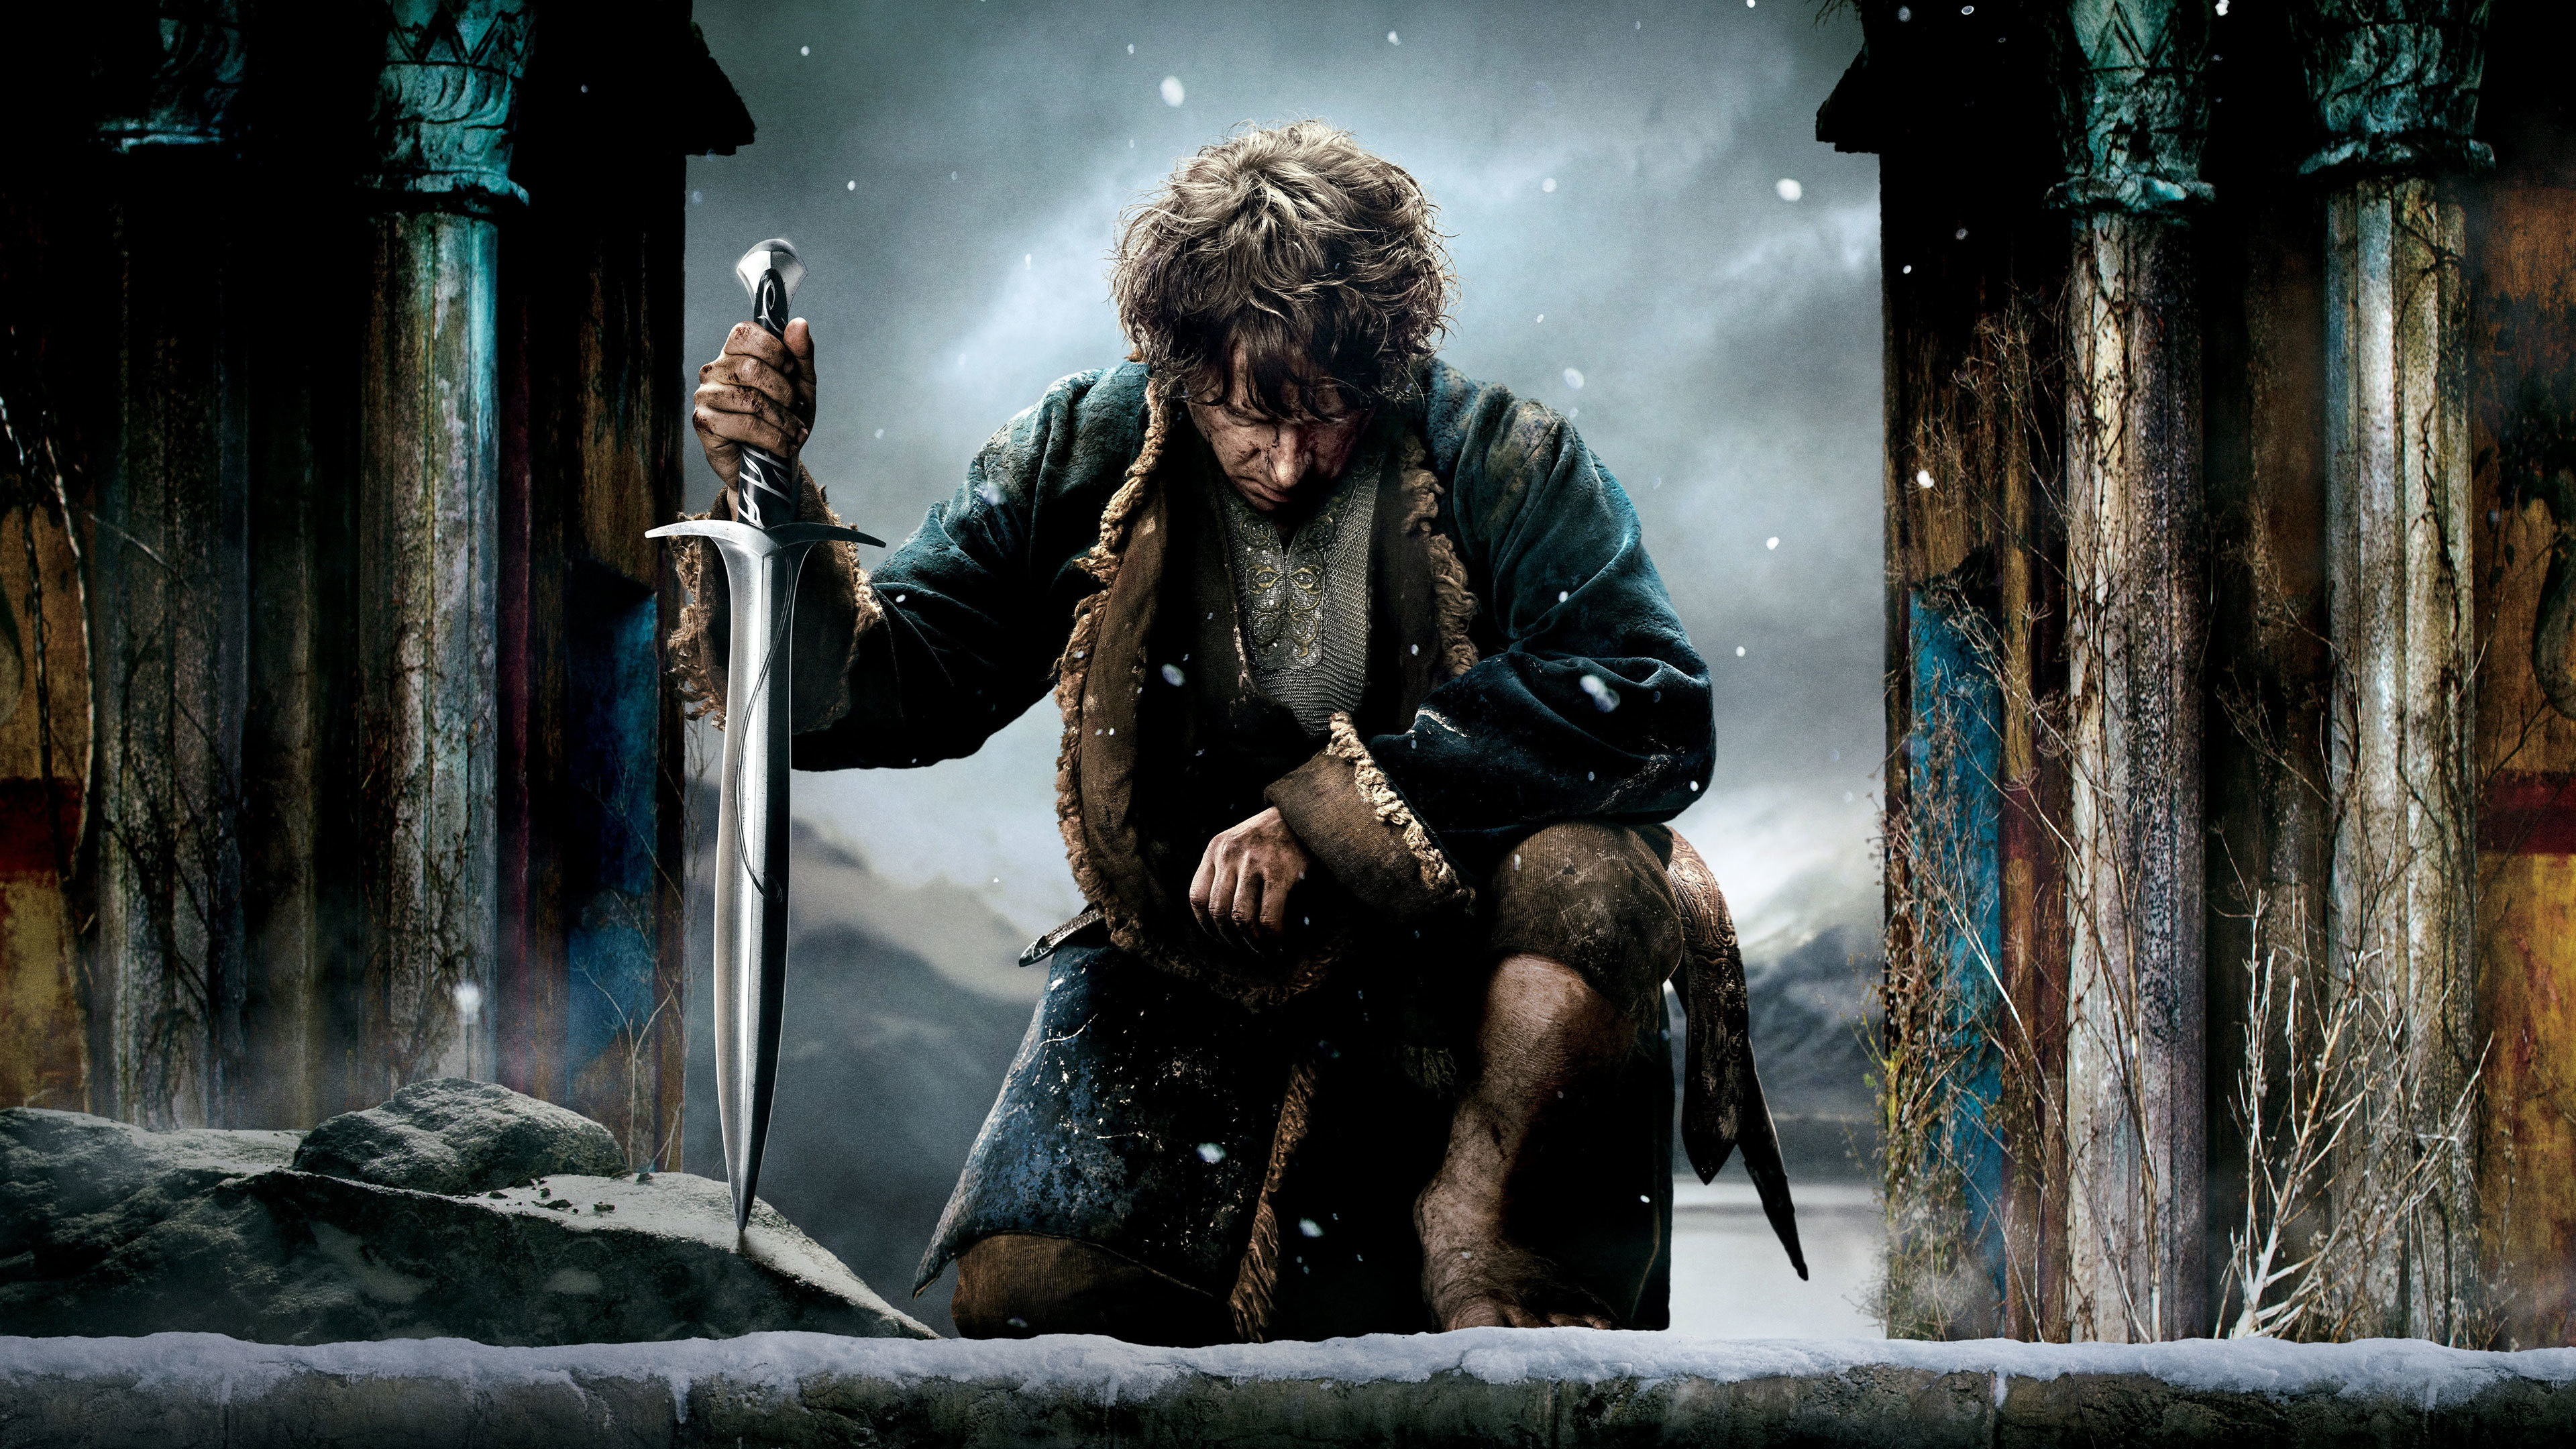 The Hobbit (Movie): The Battle Of The Five Armies, A 2014 epic high fantasy adventure film directed by Peter Jackson. 3840x2160 4K Wallpaper.